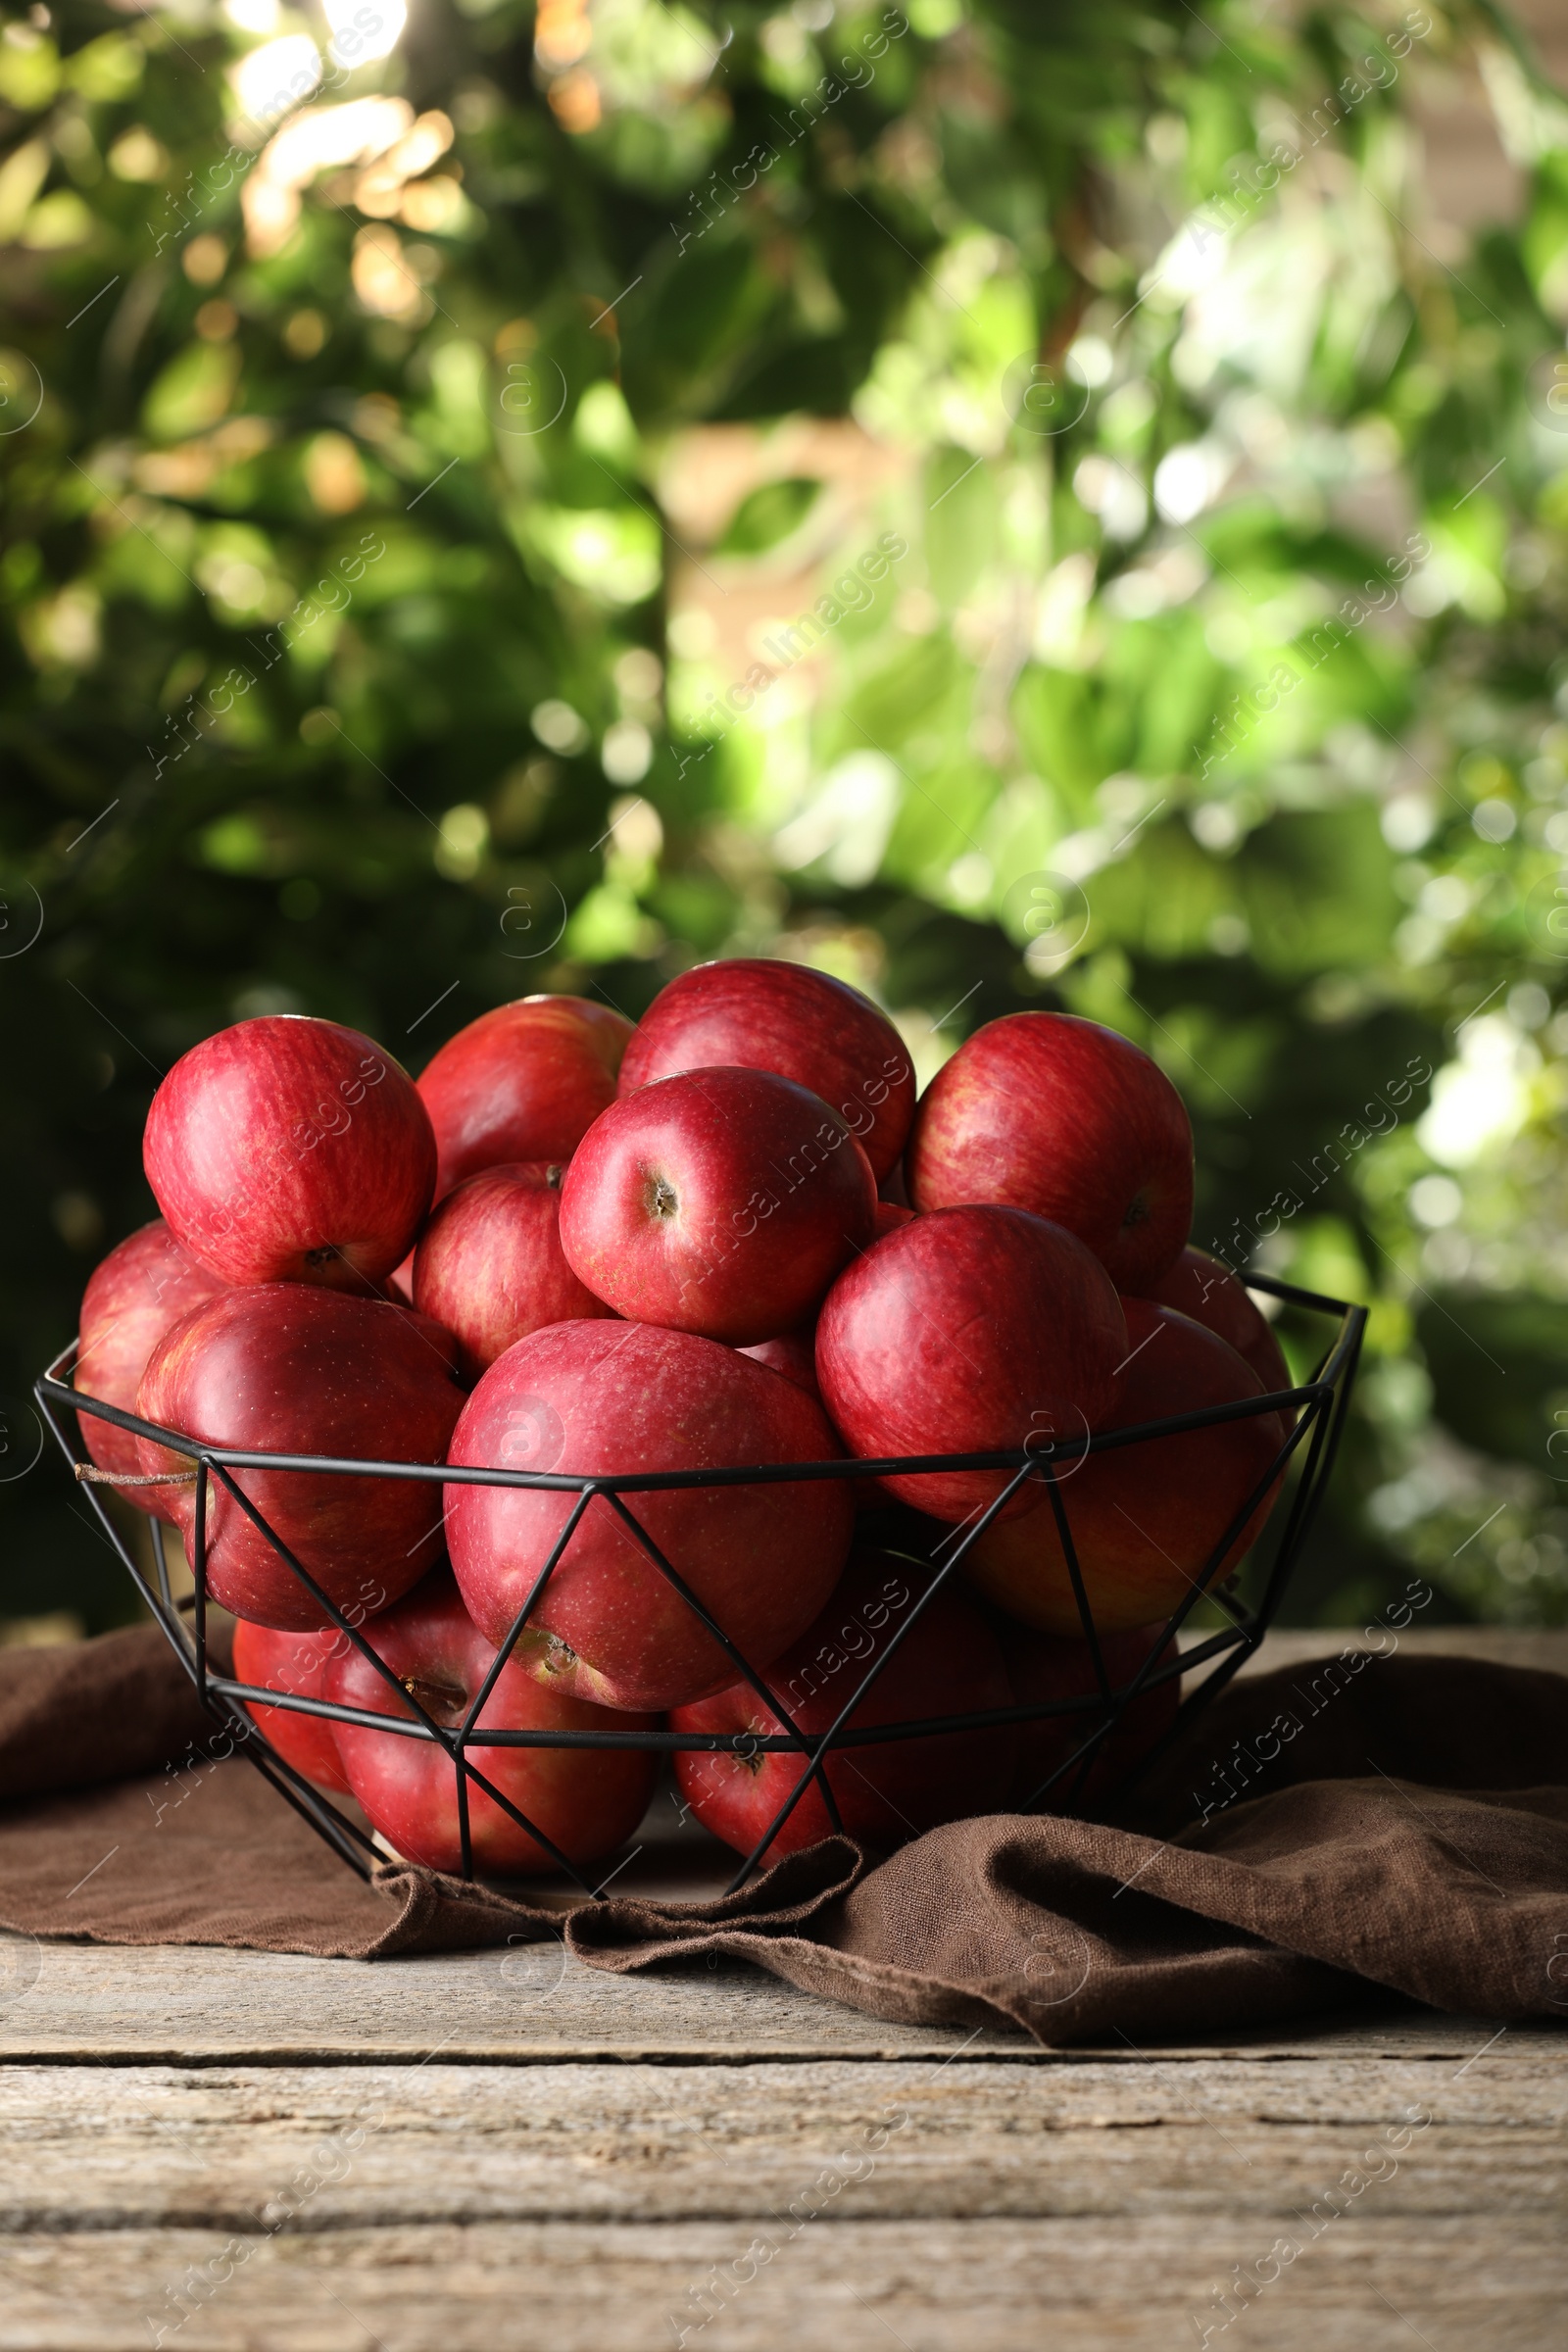 Photo of Ripe red apples in bowl on wooden table outdoors